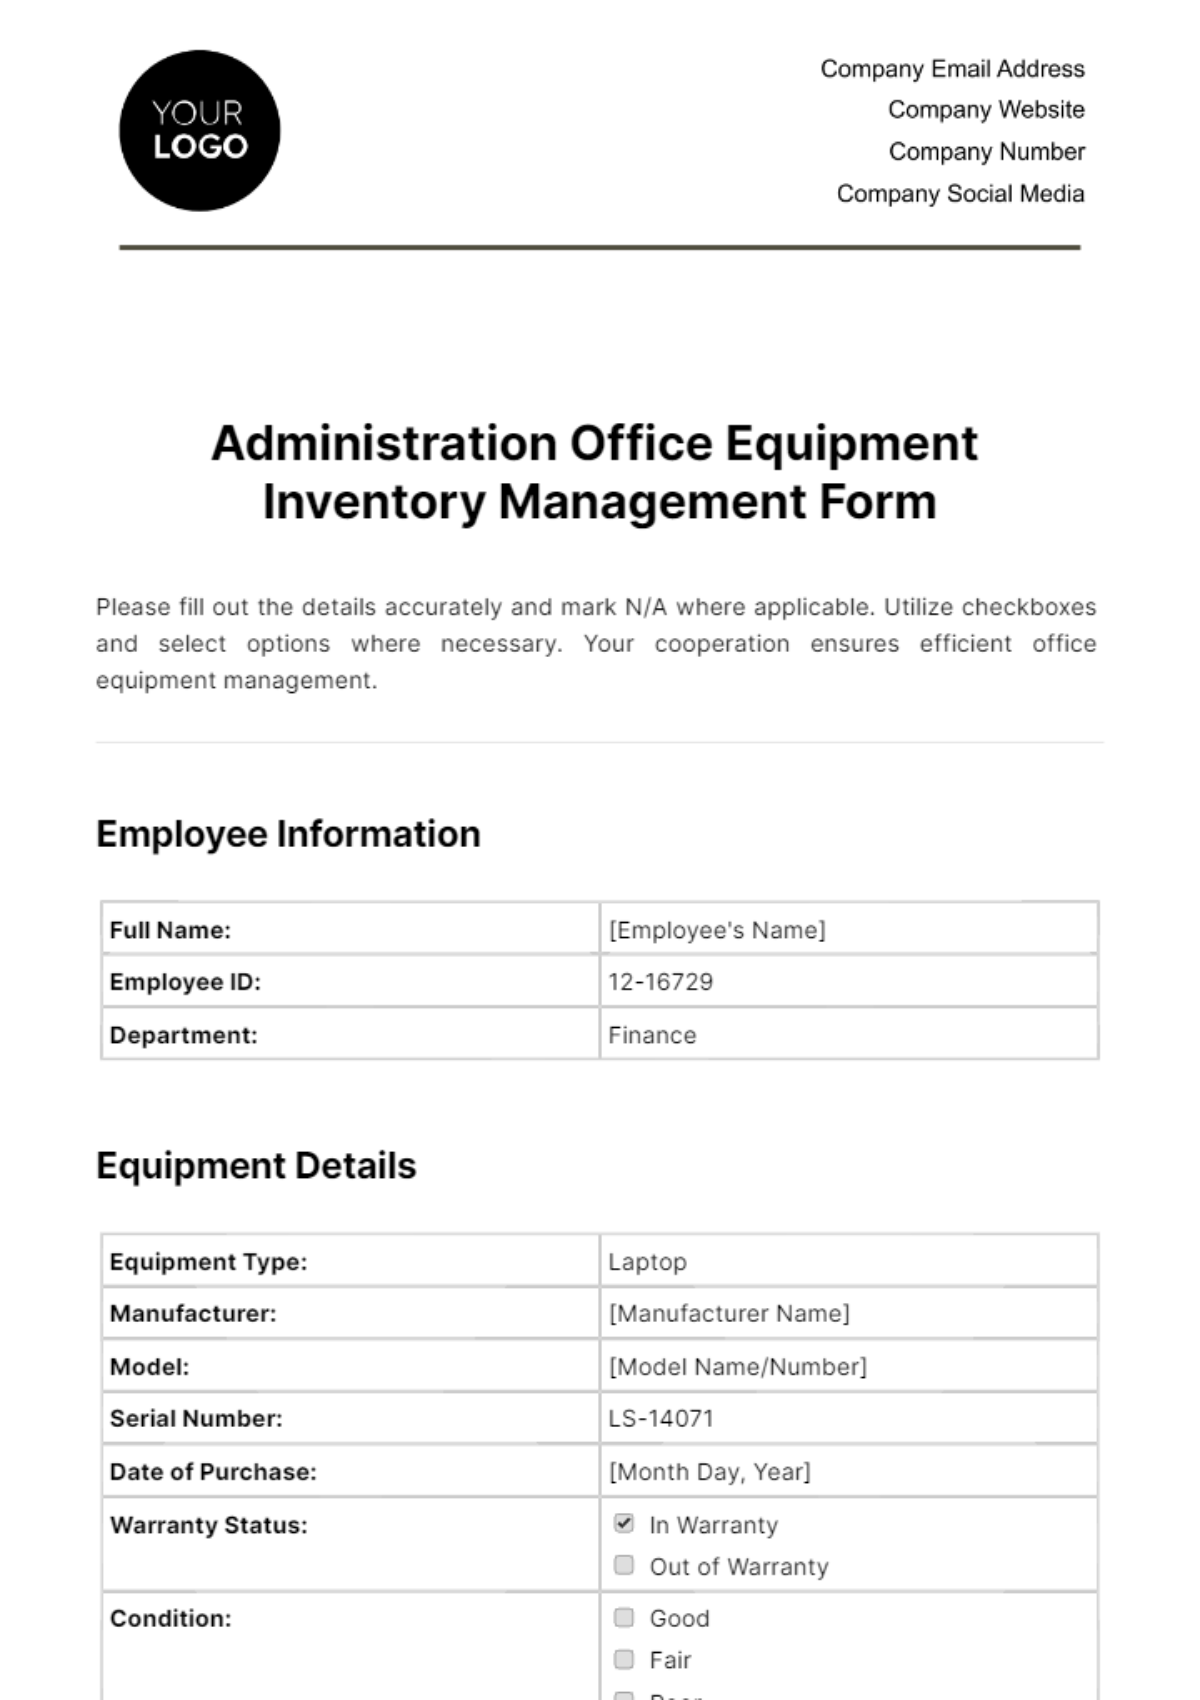 Administration Office Equipment Inventory Management Form Template